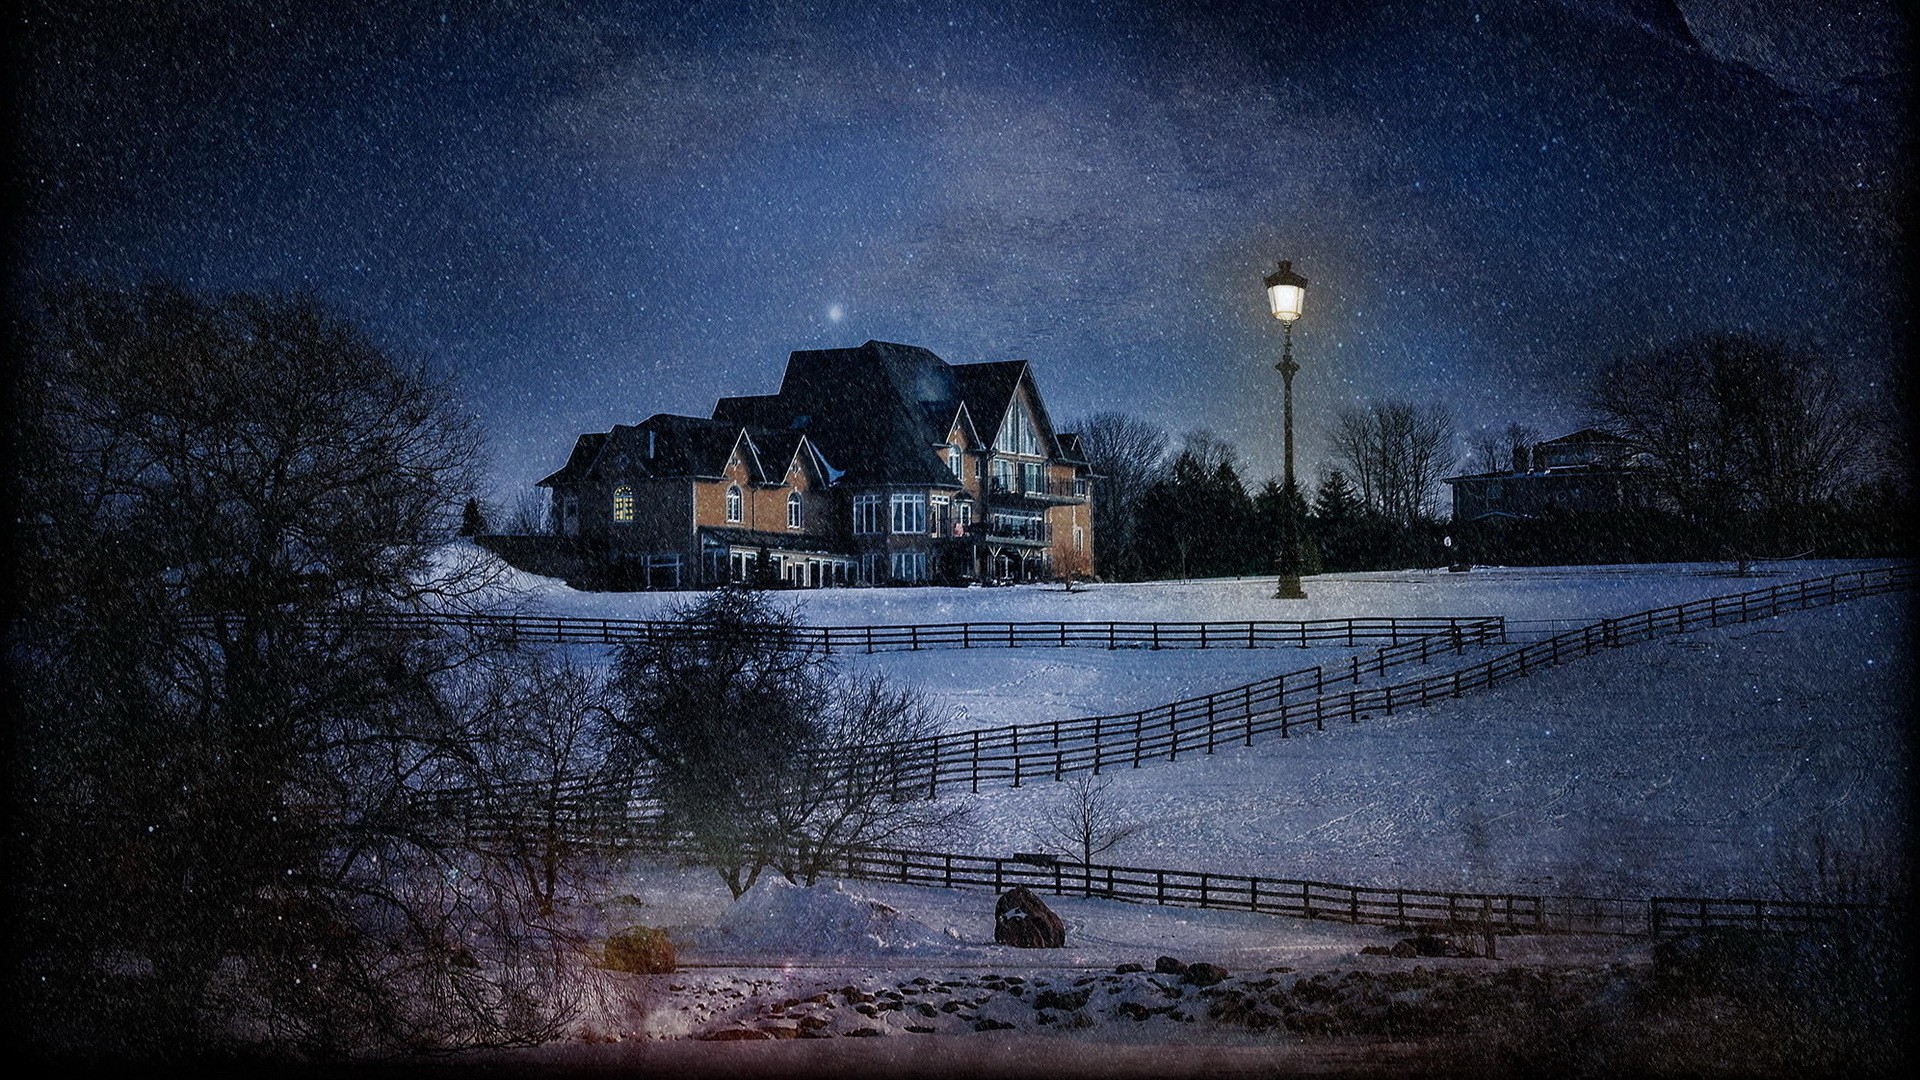 General 1920x1080 house lights nature trees forest night winter snow hills fence field stars lamp mansions